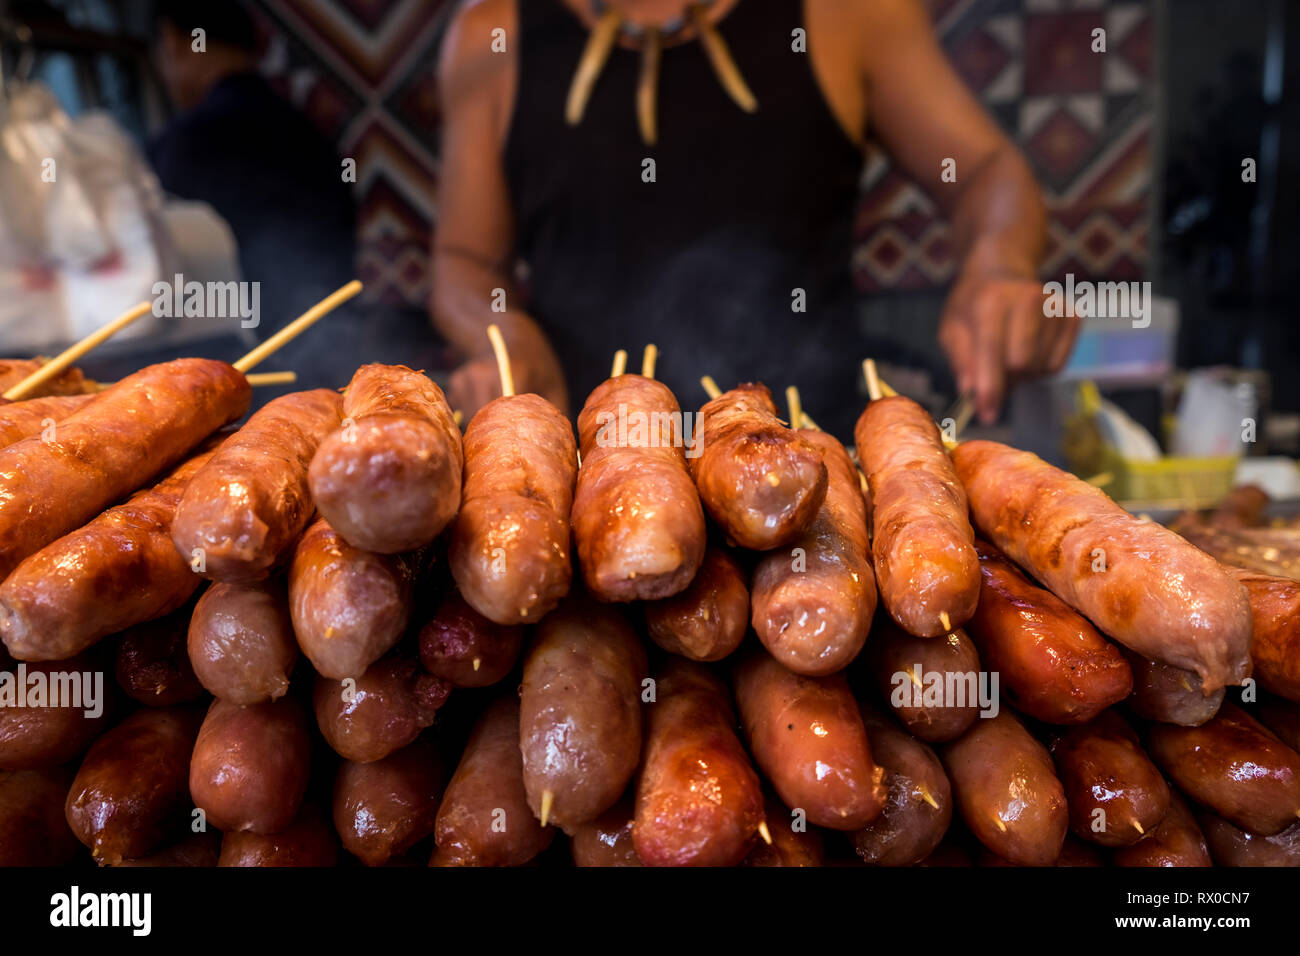 Taiwanese's style sausage selling in night market, one of the street food markets in Taichung, Taiwan Stock Photo